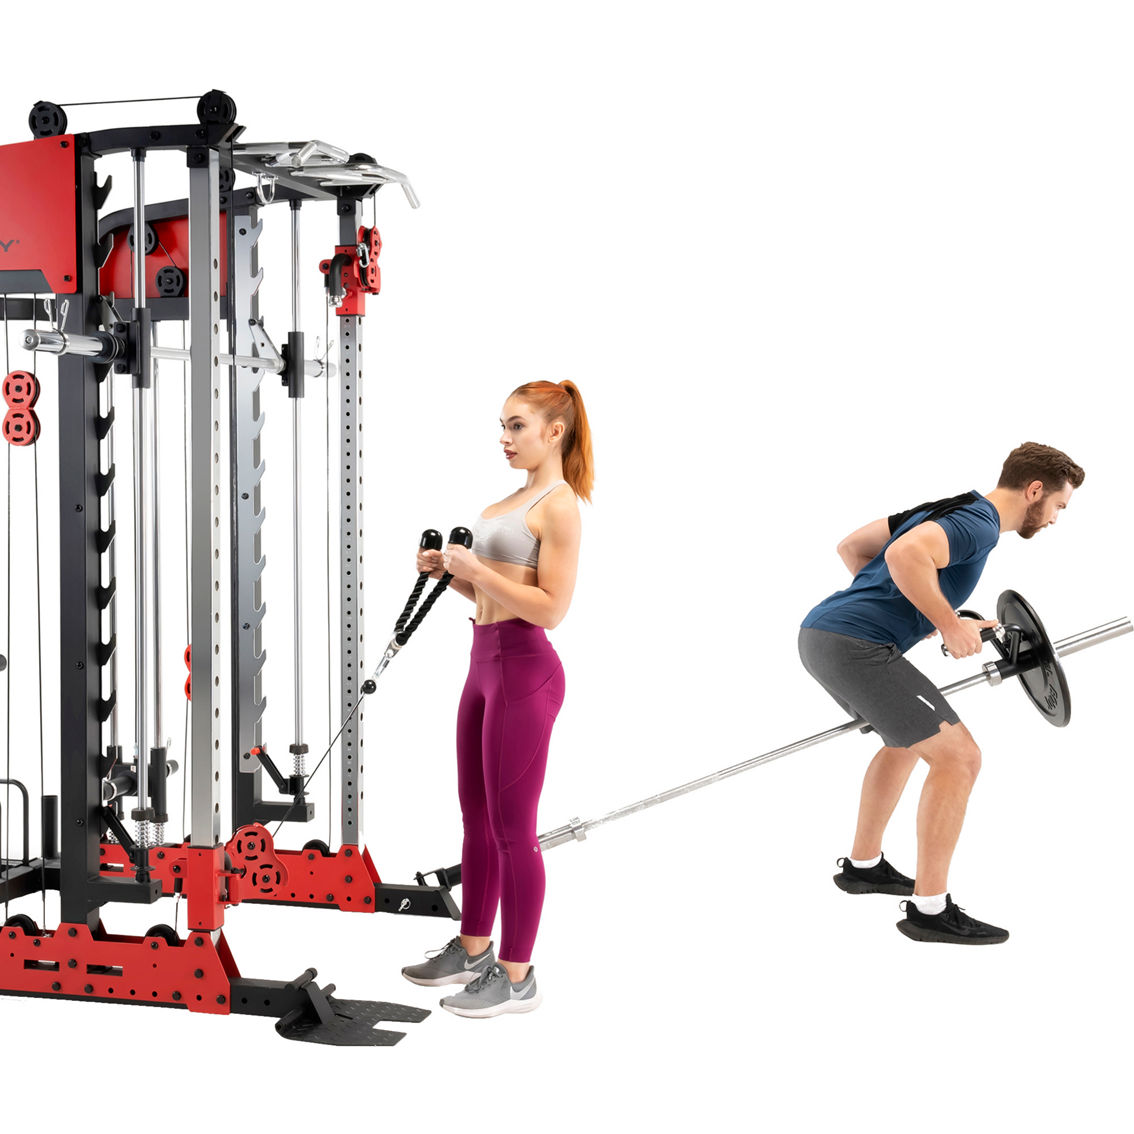 Marcy Pro Deluxe Smith Cage Home Gym System - Image 4 of 5